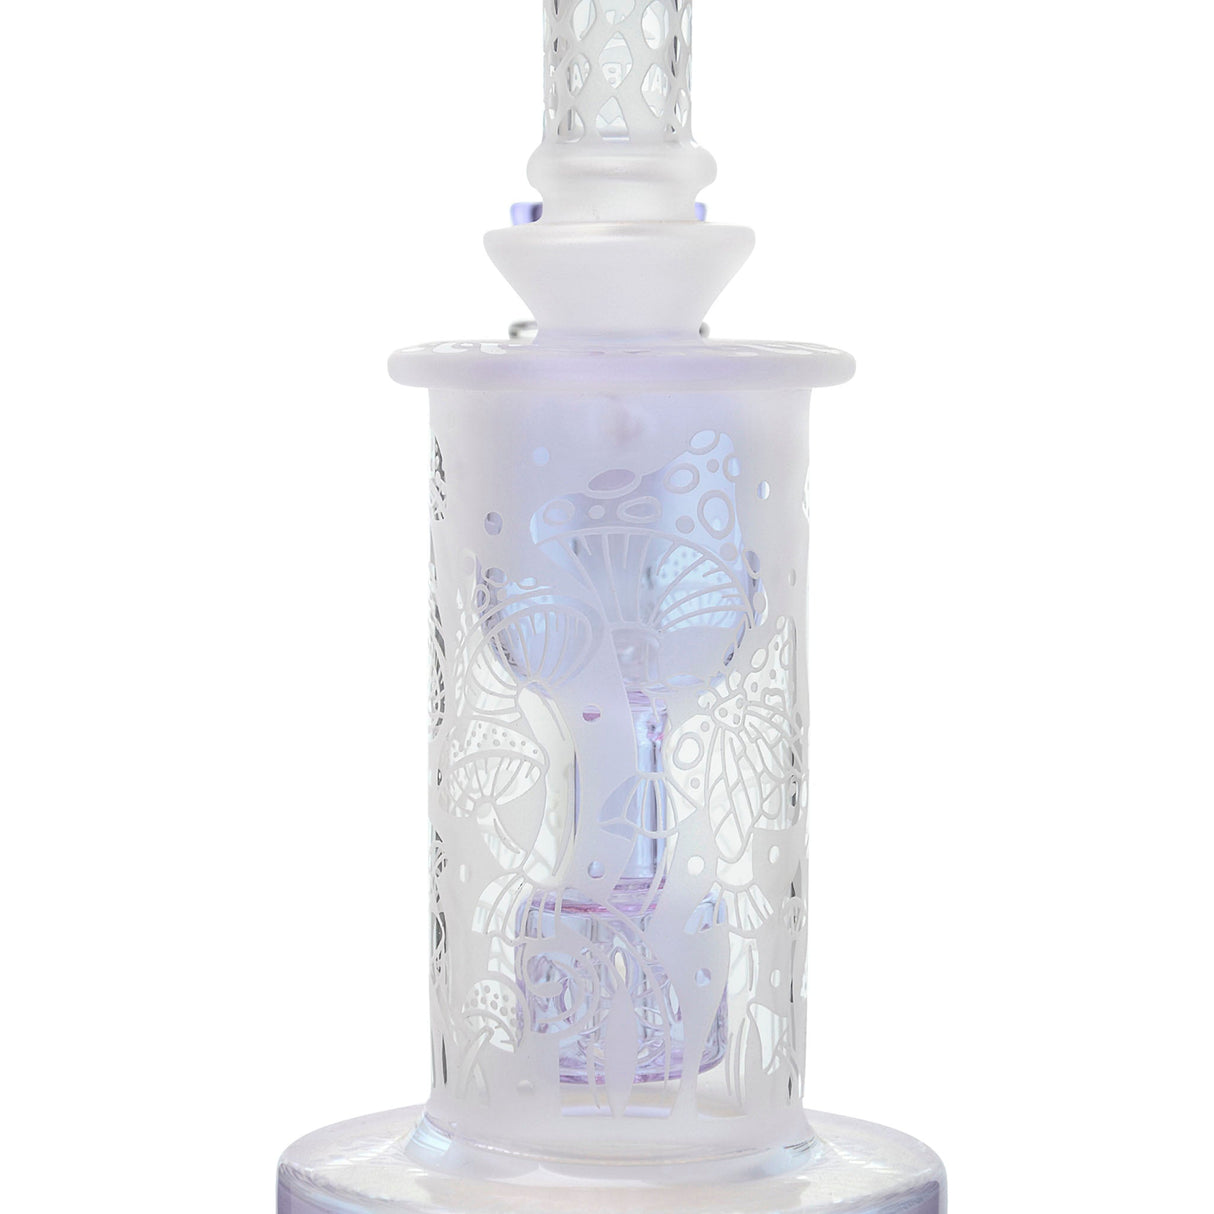 Calibear Sandblasted Seed Of Life Perc Torus Can Bong with intricate design and bent neck